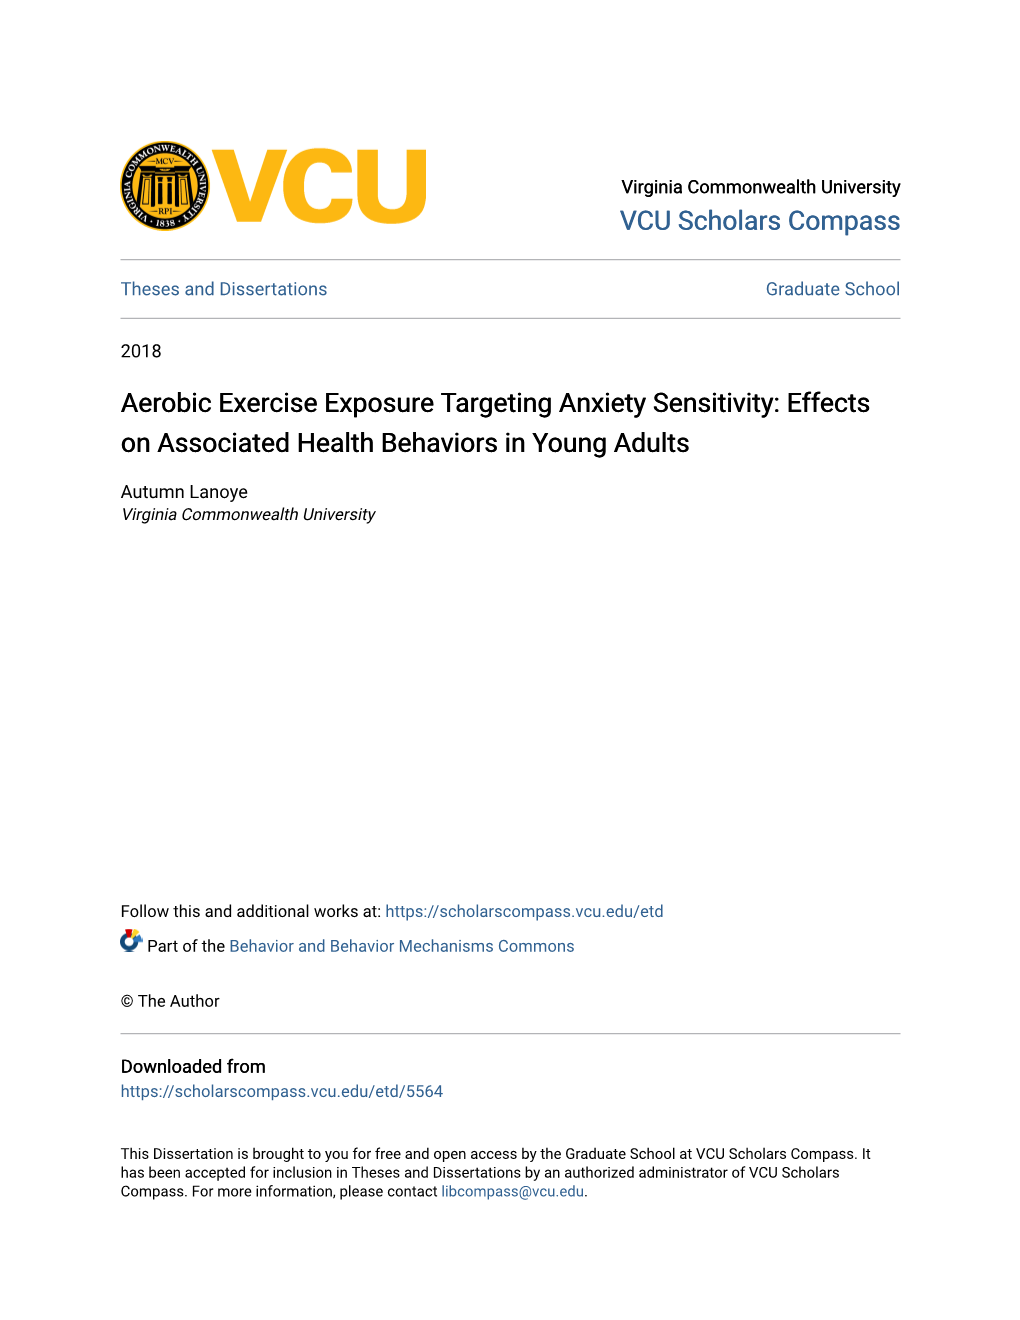 Aerobic Exercise Exposure Targeting Anxiety Sensitivity: Effects on Associated Health Behaviors in Young Adults